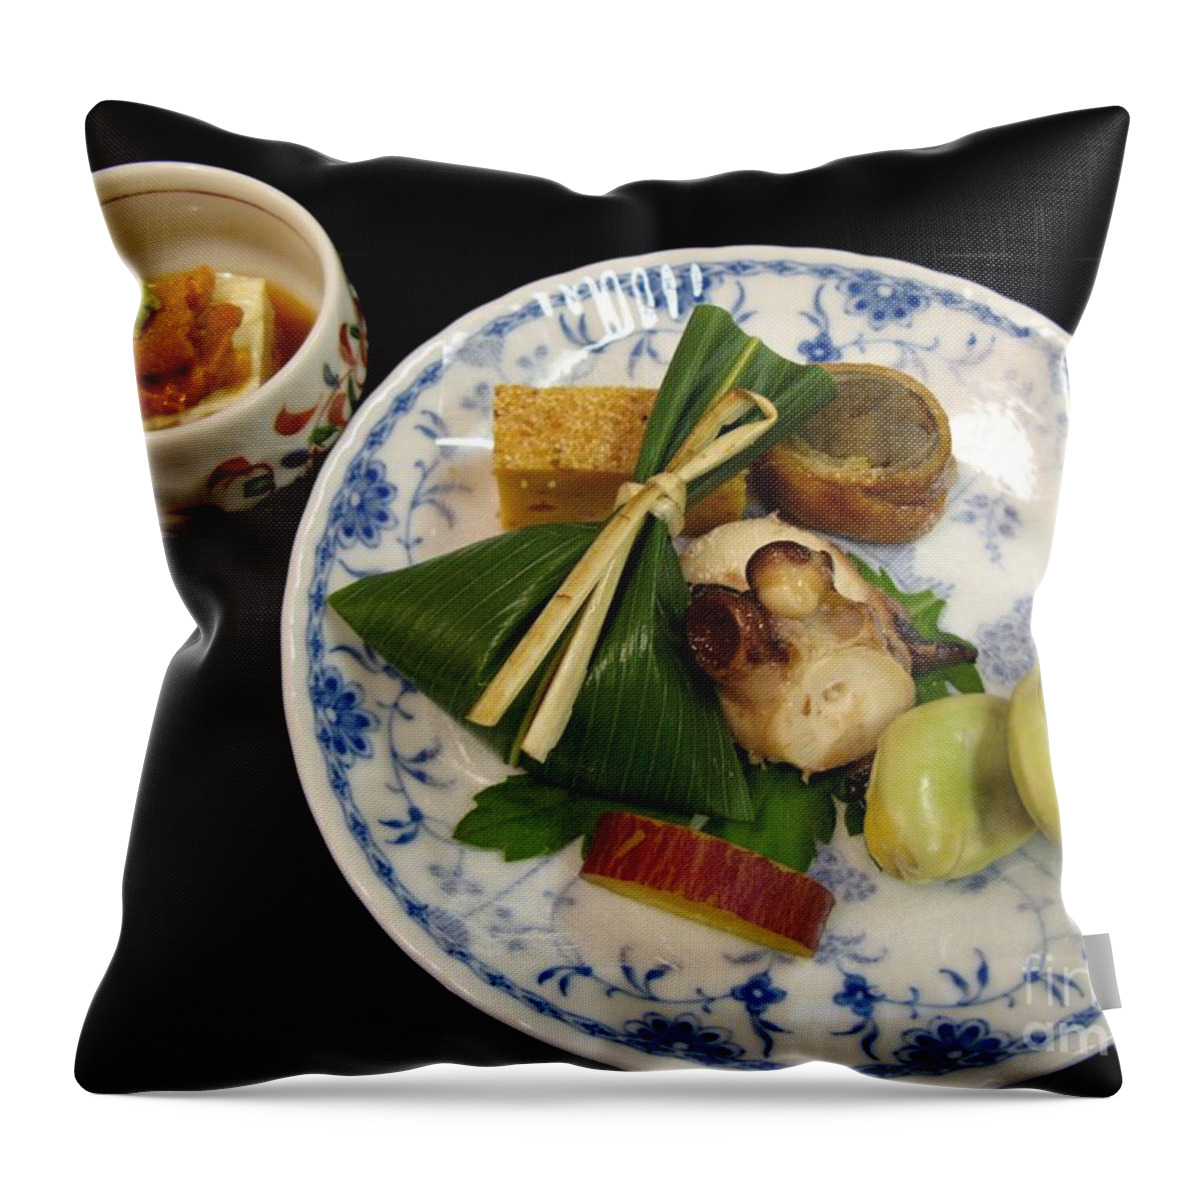 Japan Throw Pillow featuring the photograph Ryokan Dinner by Carol Sweetwood